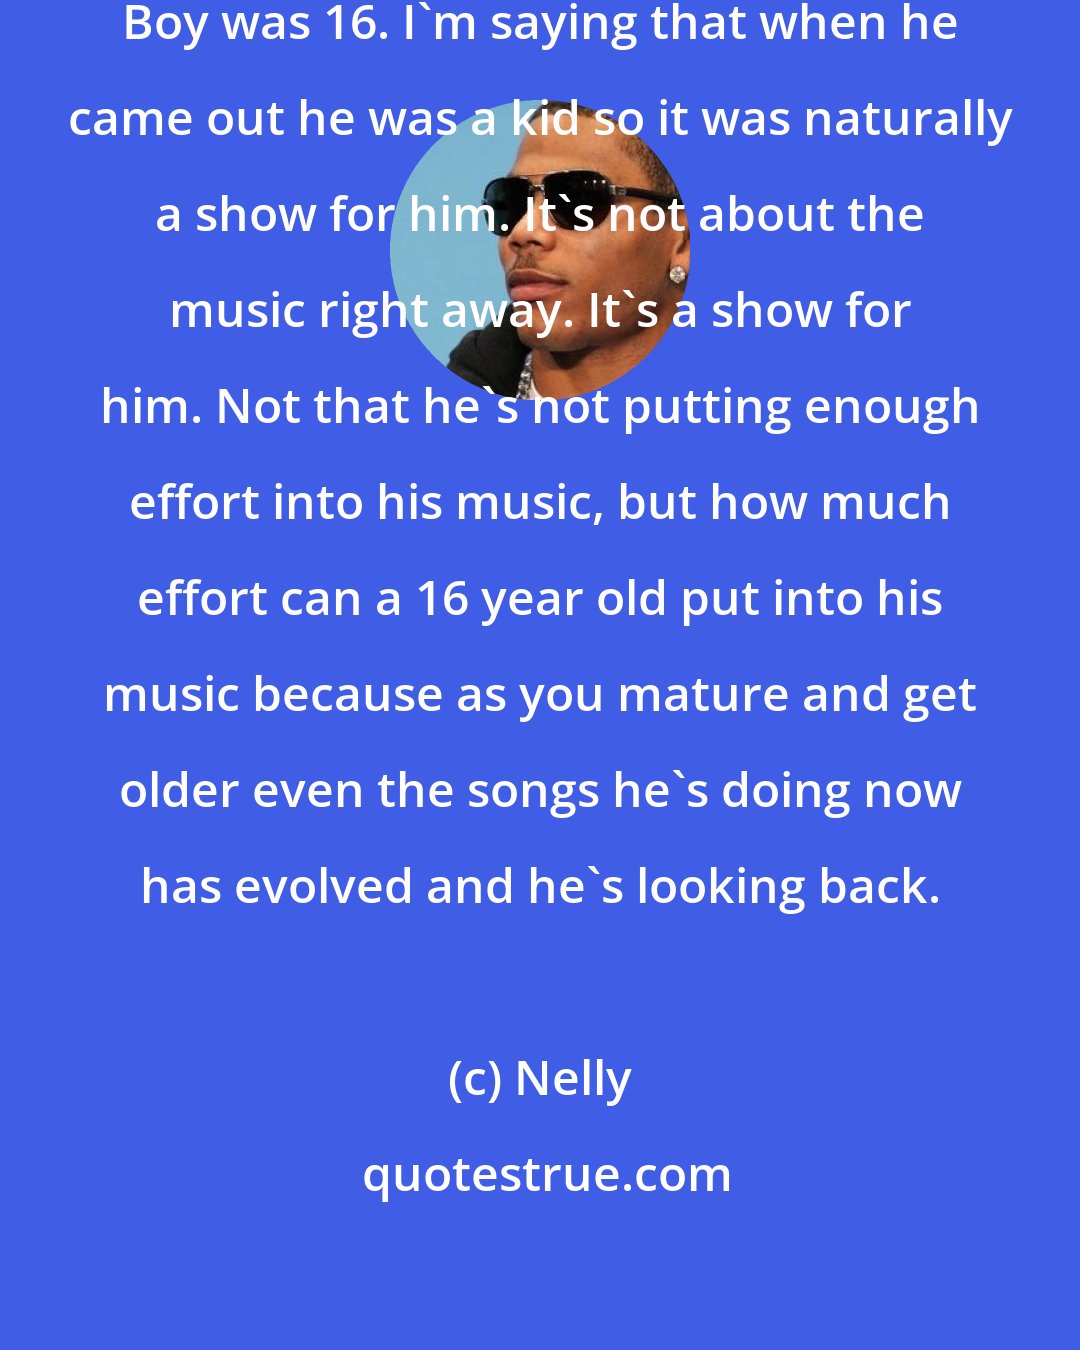 Nelly: I wasn't a kid when I came out. Soulja Boy was 16. I'm saying that when he came out he was a kid so it was naturally a show for him. It's not about the music right away. It's a show for him. Not that he's not putting enough effort into his music, but how much effort can a 16 year old put into his music because as you mature and get older even the songs he's doing now has evolved and he's looking back.